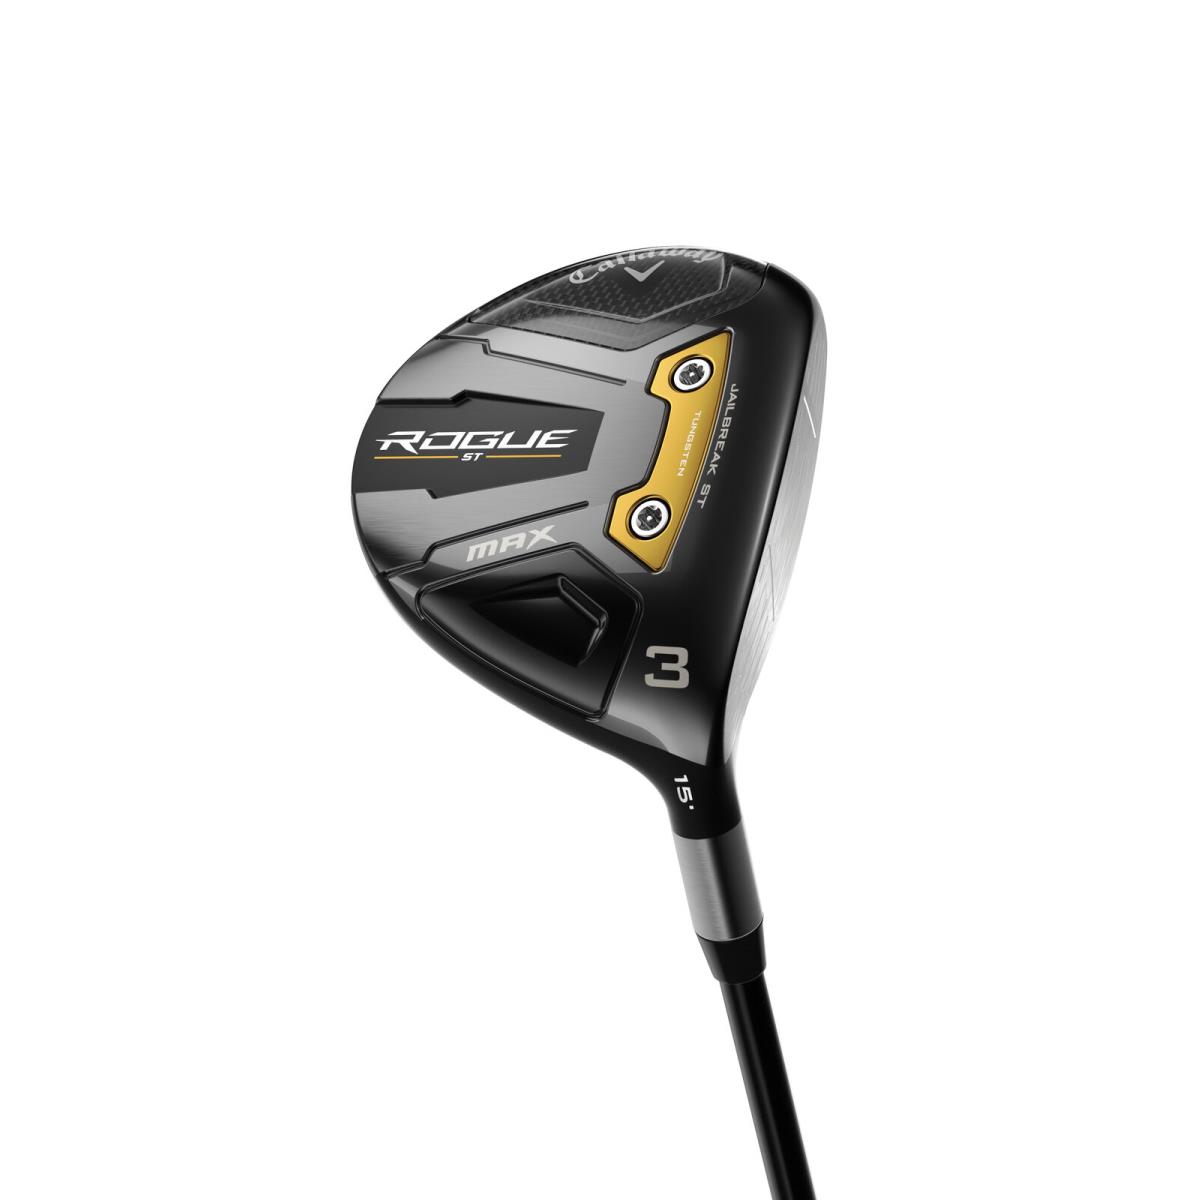 Callaway Rogue ST Max Fairway Wood Options Available